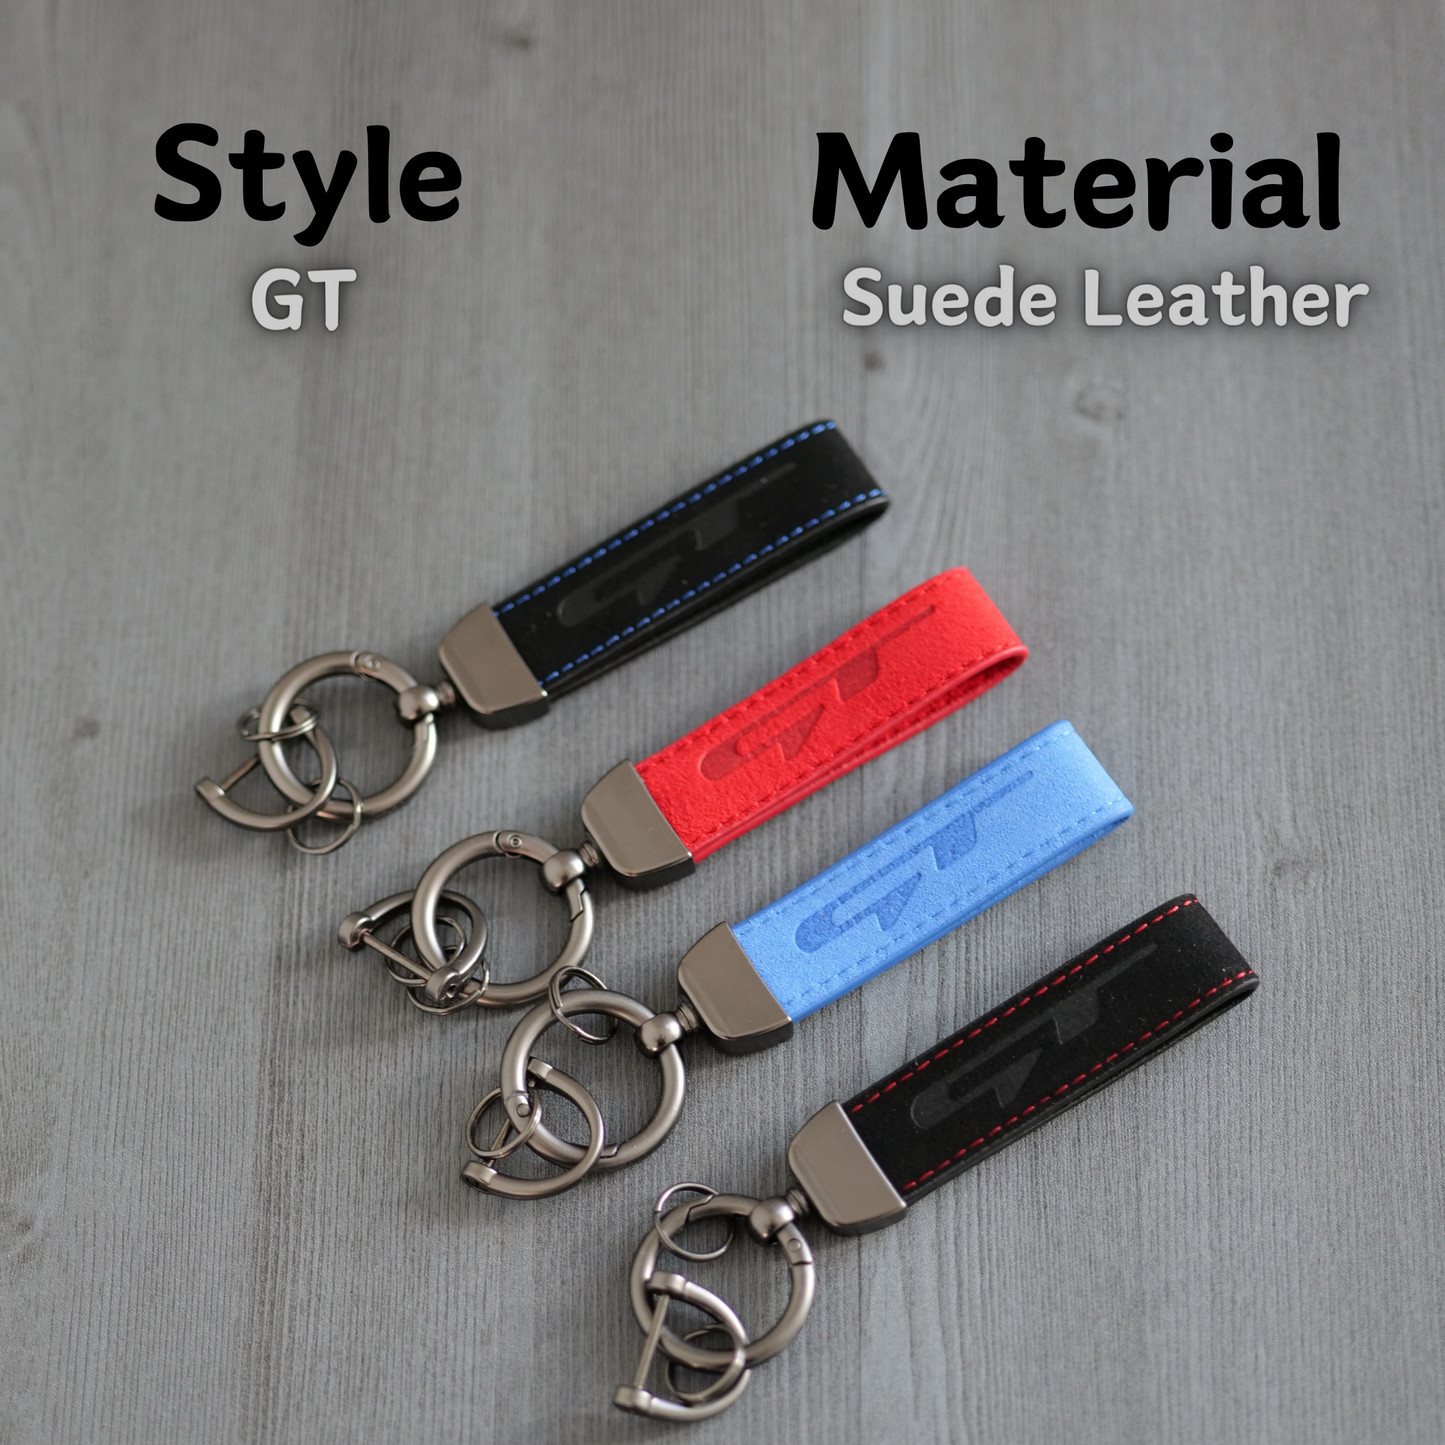 Keychains for GT|GT-Line|N-Line|N|KDM|Kia Vehicles | Perfect Gift for Kia Owners